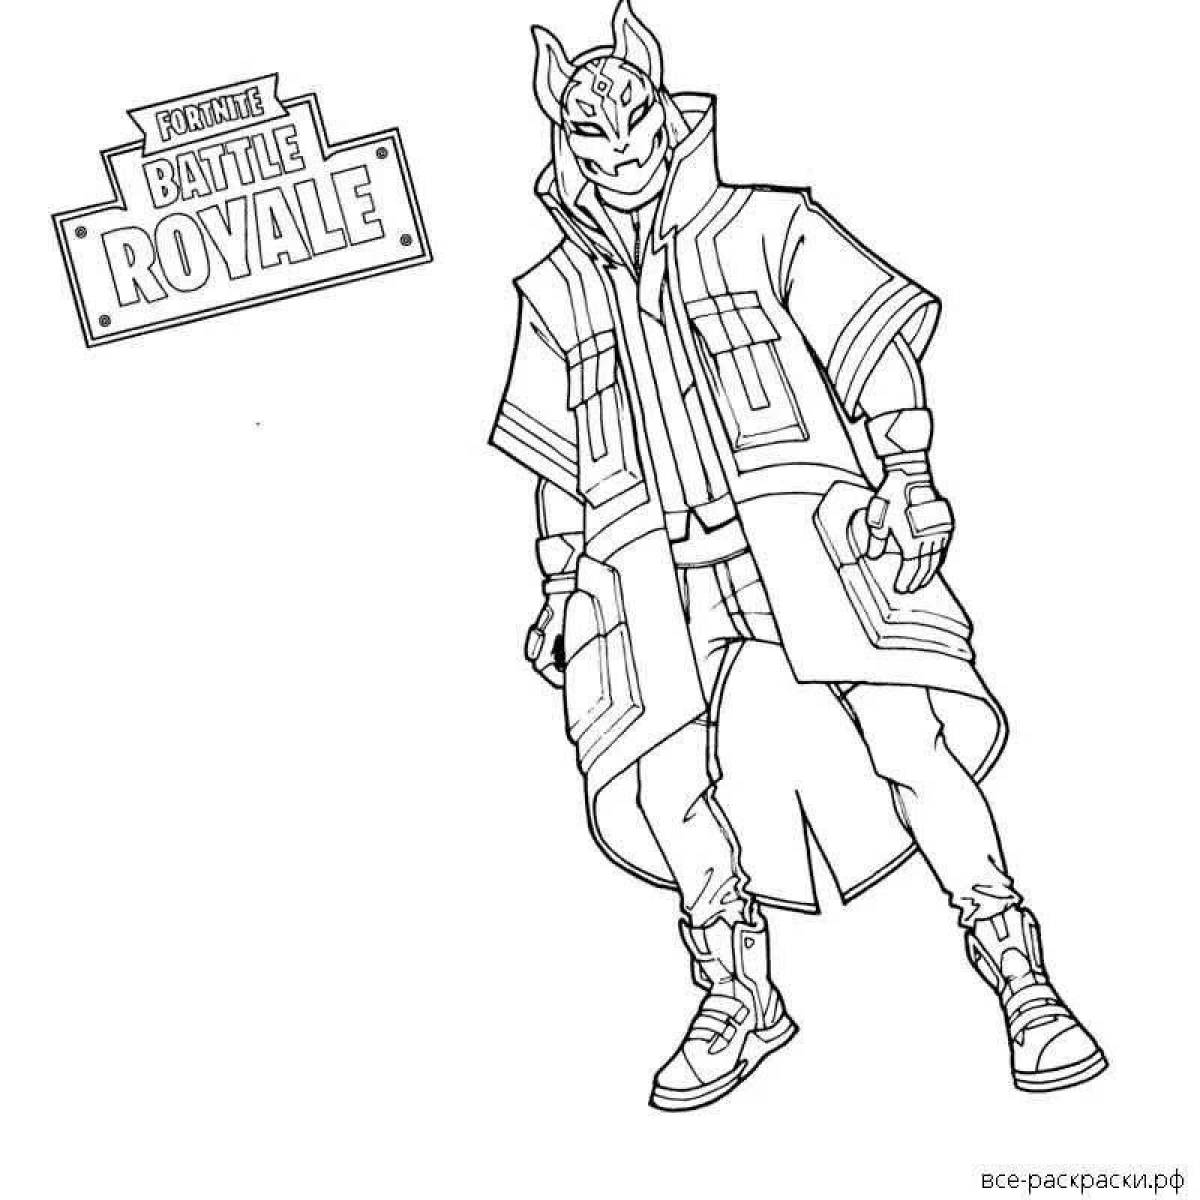 Fortnite live combat coloring page